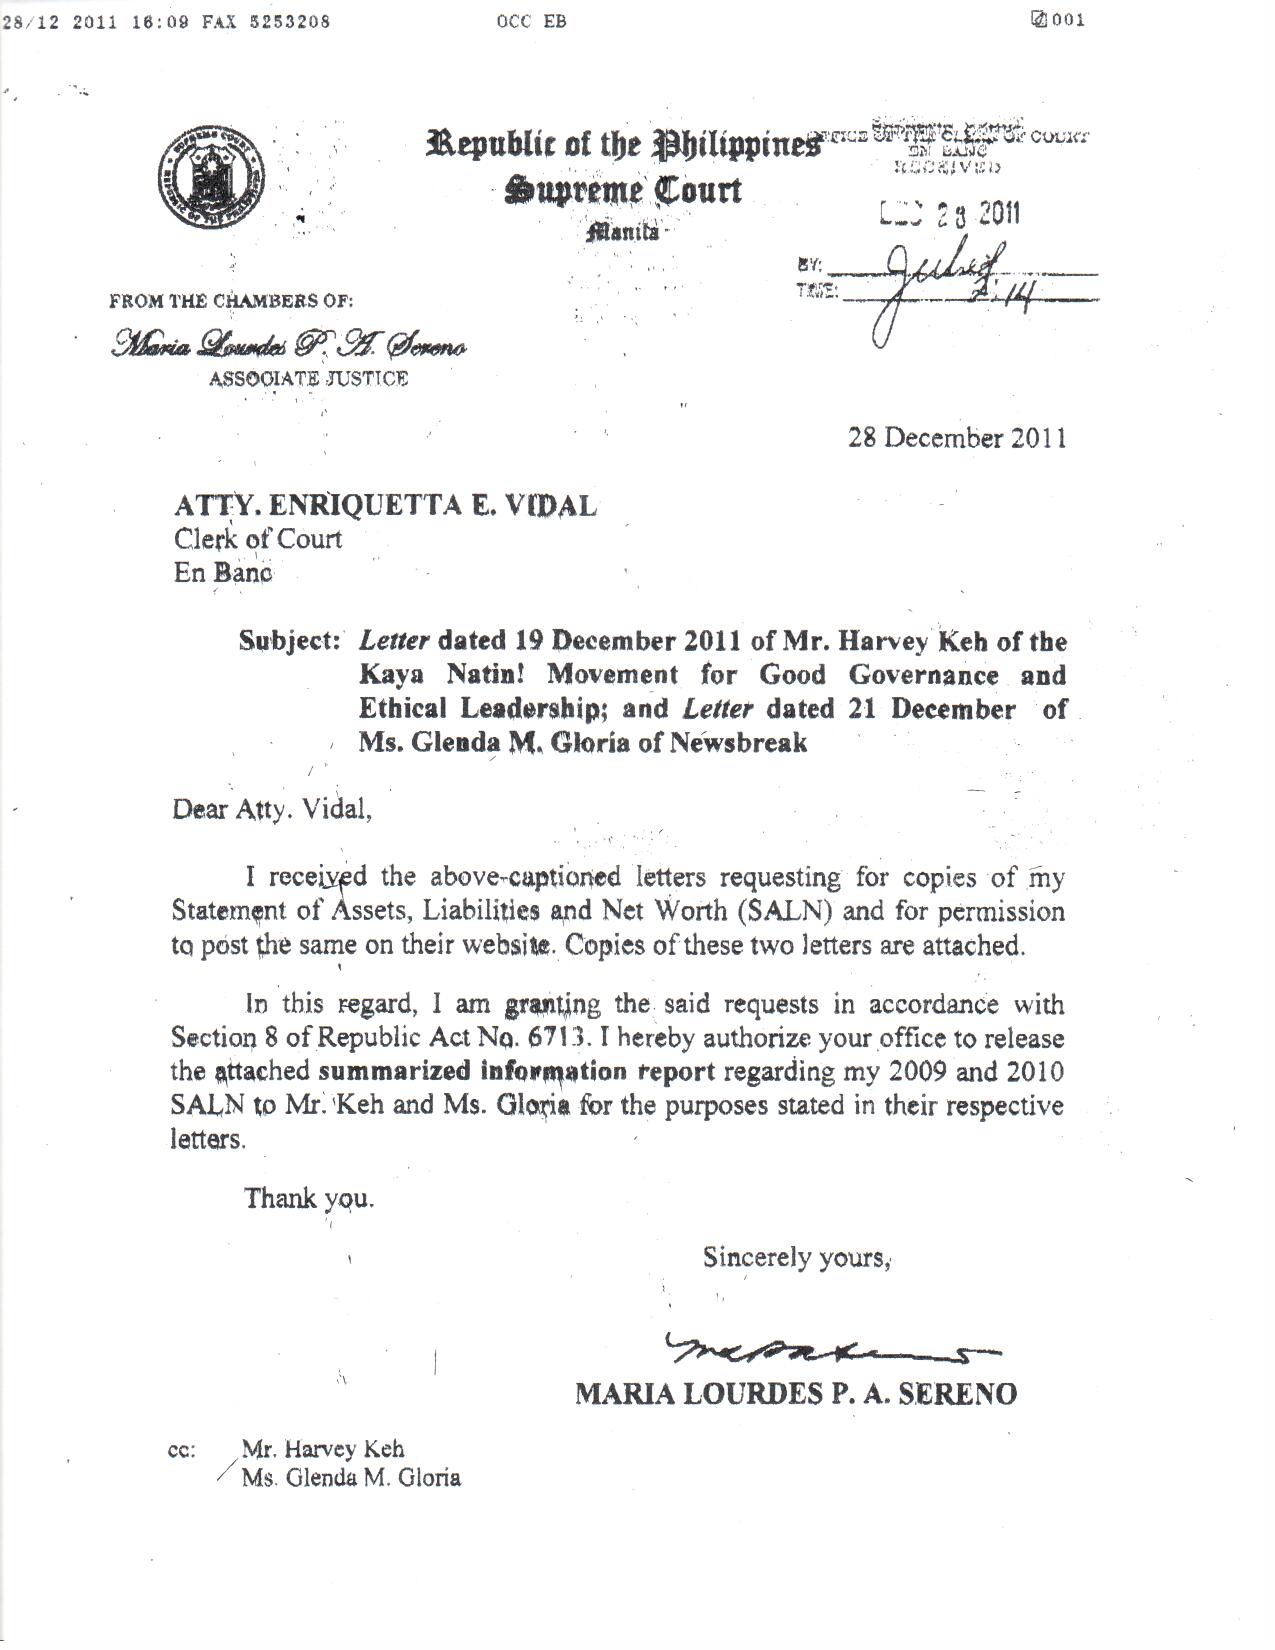 RELEASE IT: SC Justice Maria Lourdes Sereno tells Clerk of Court Enriqueta Vidal to release the summary of her SALN 